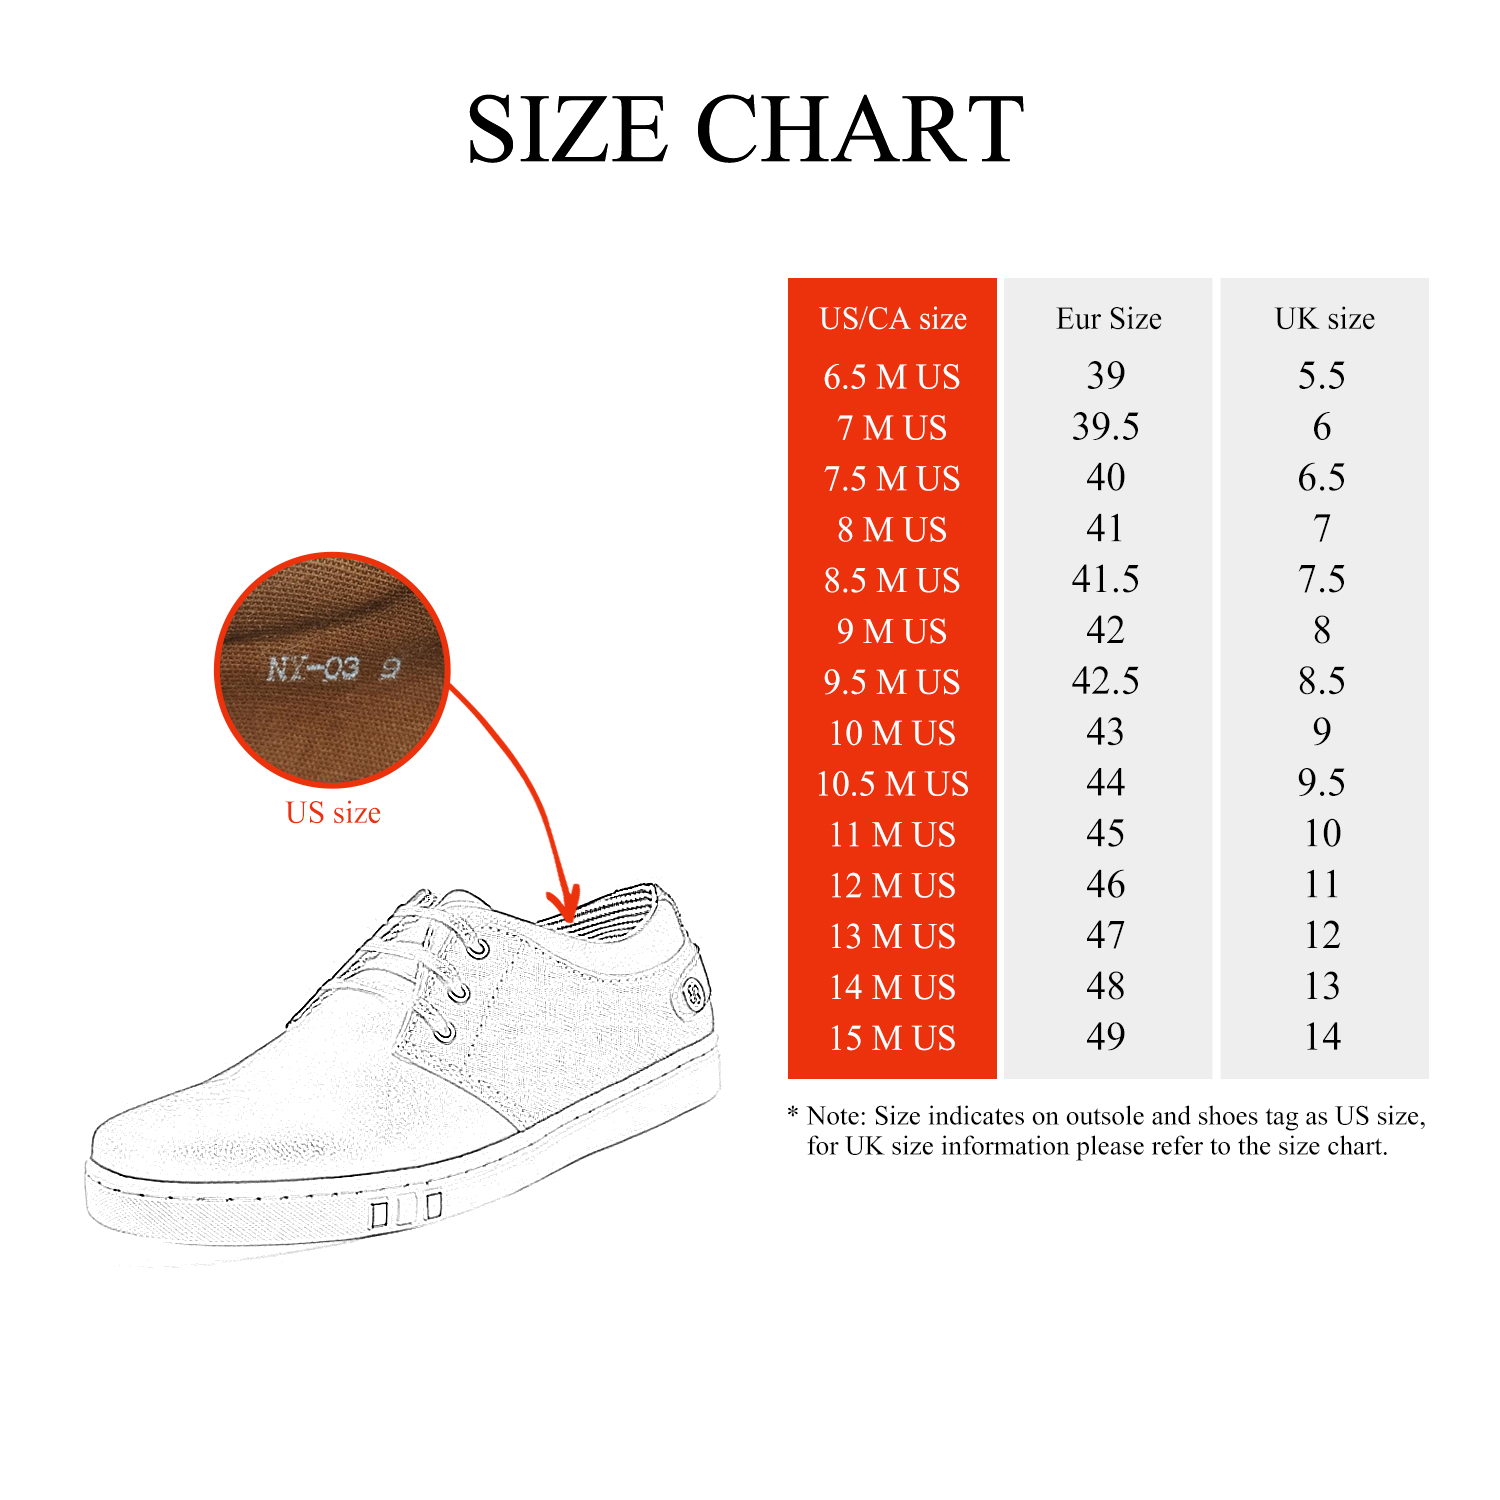 BRUNO MARC Mens Fashion Casual Shoes Slip On Lace Up Walking Shoes Outdoor Sneakers NY-03 BROWN Size 7 - image 4 of 4